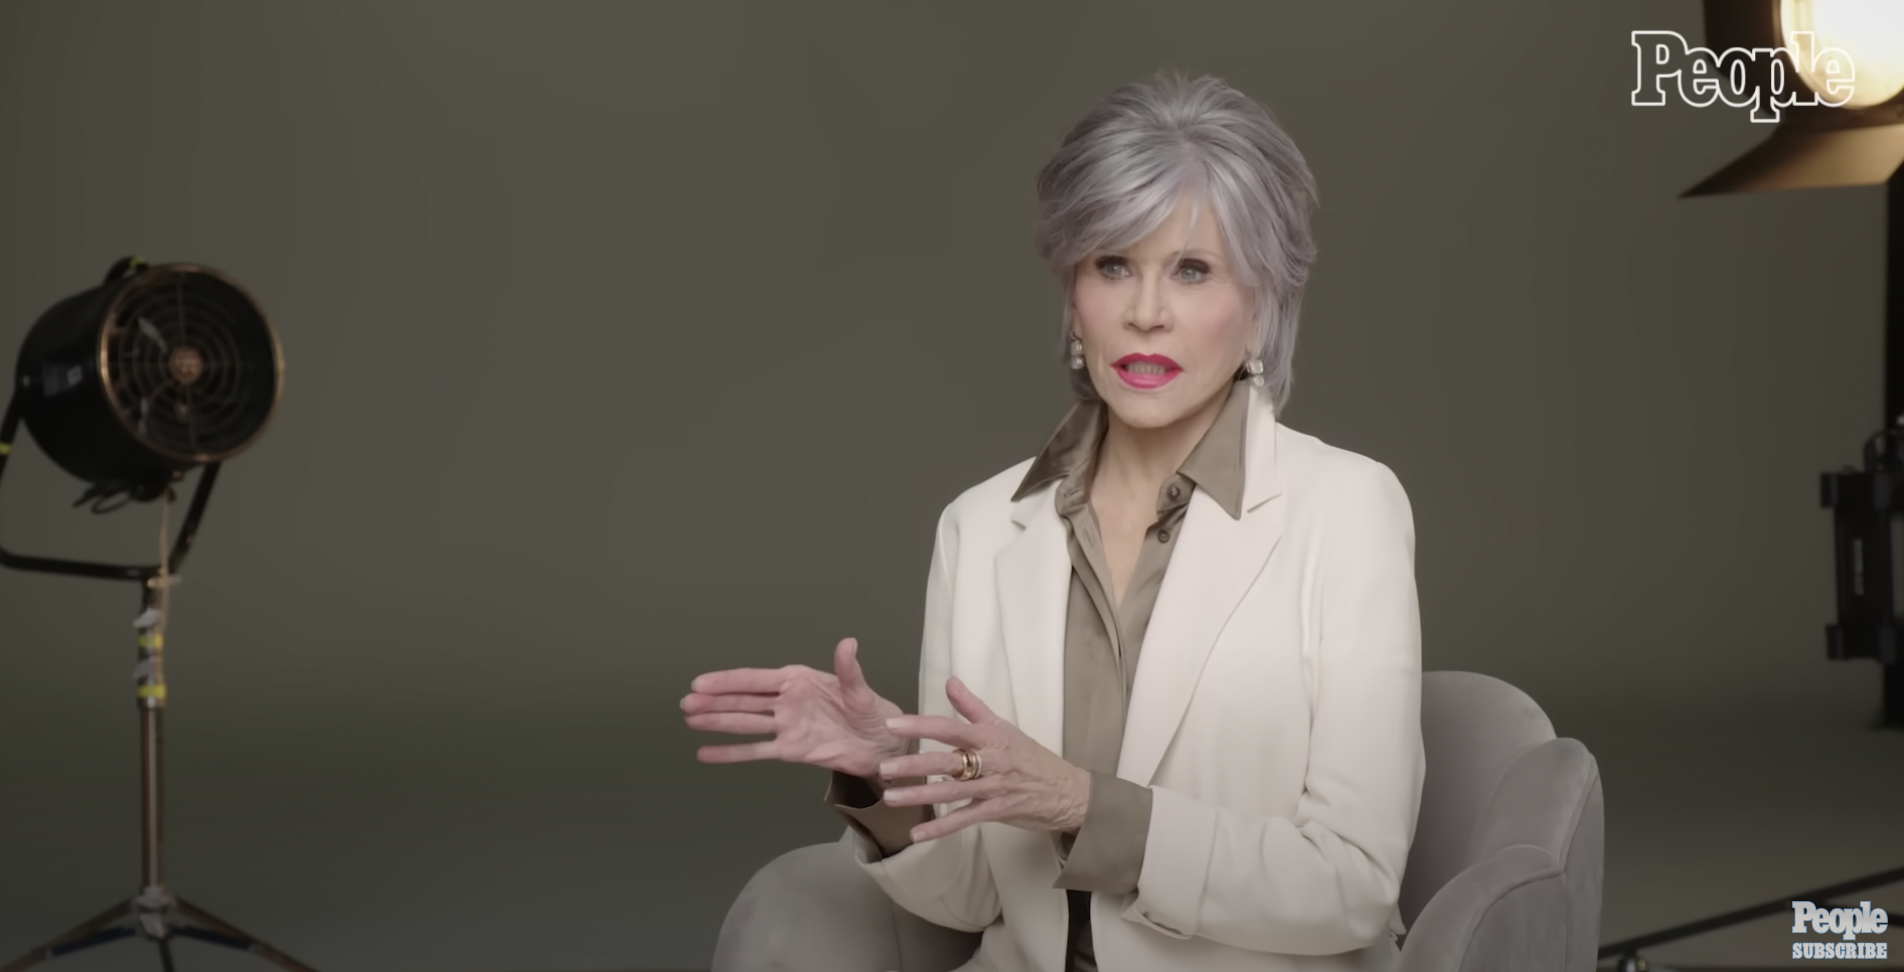 Jane Fonda talks about the climate crisis in an interview with People | Source: youtube.com/People